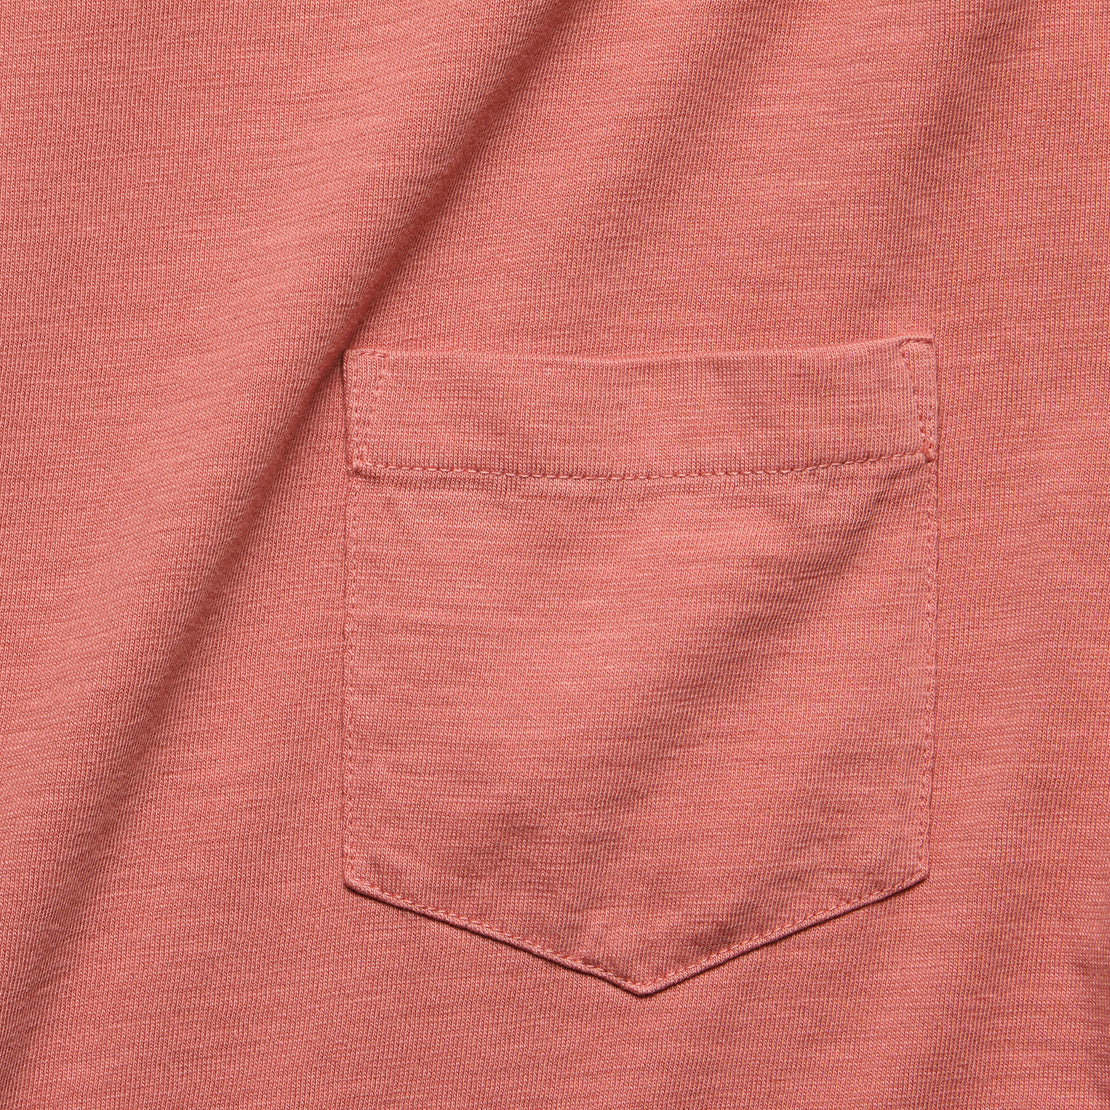 Garment Dyed Pocket Tee - New Red - Faherty - STAG Provisions - Tops - S/S Tee